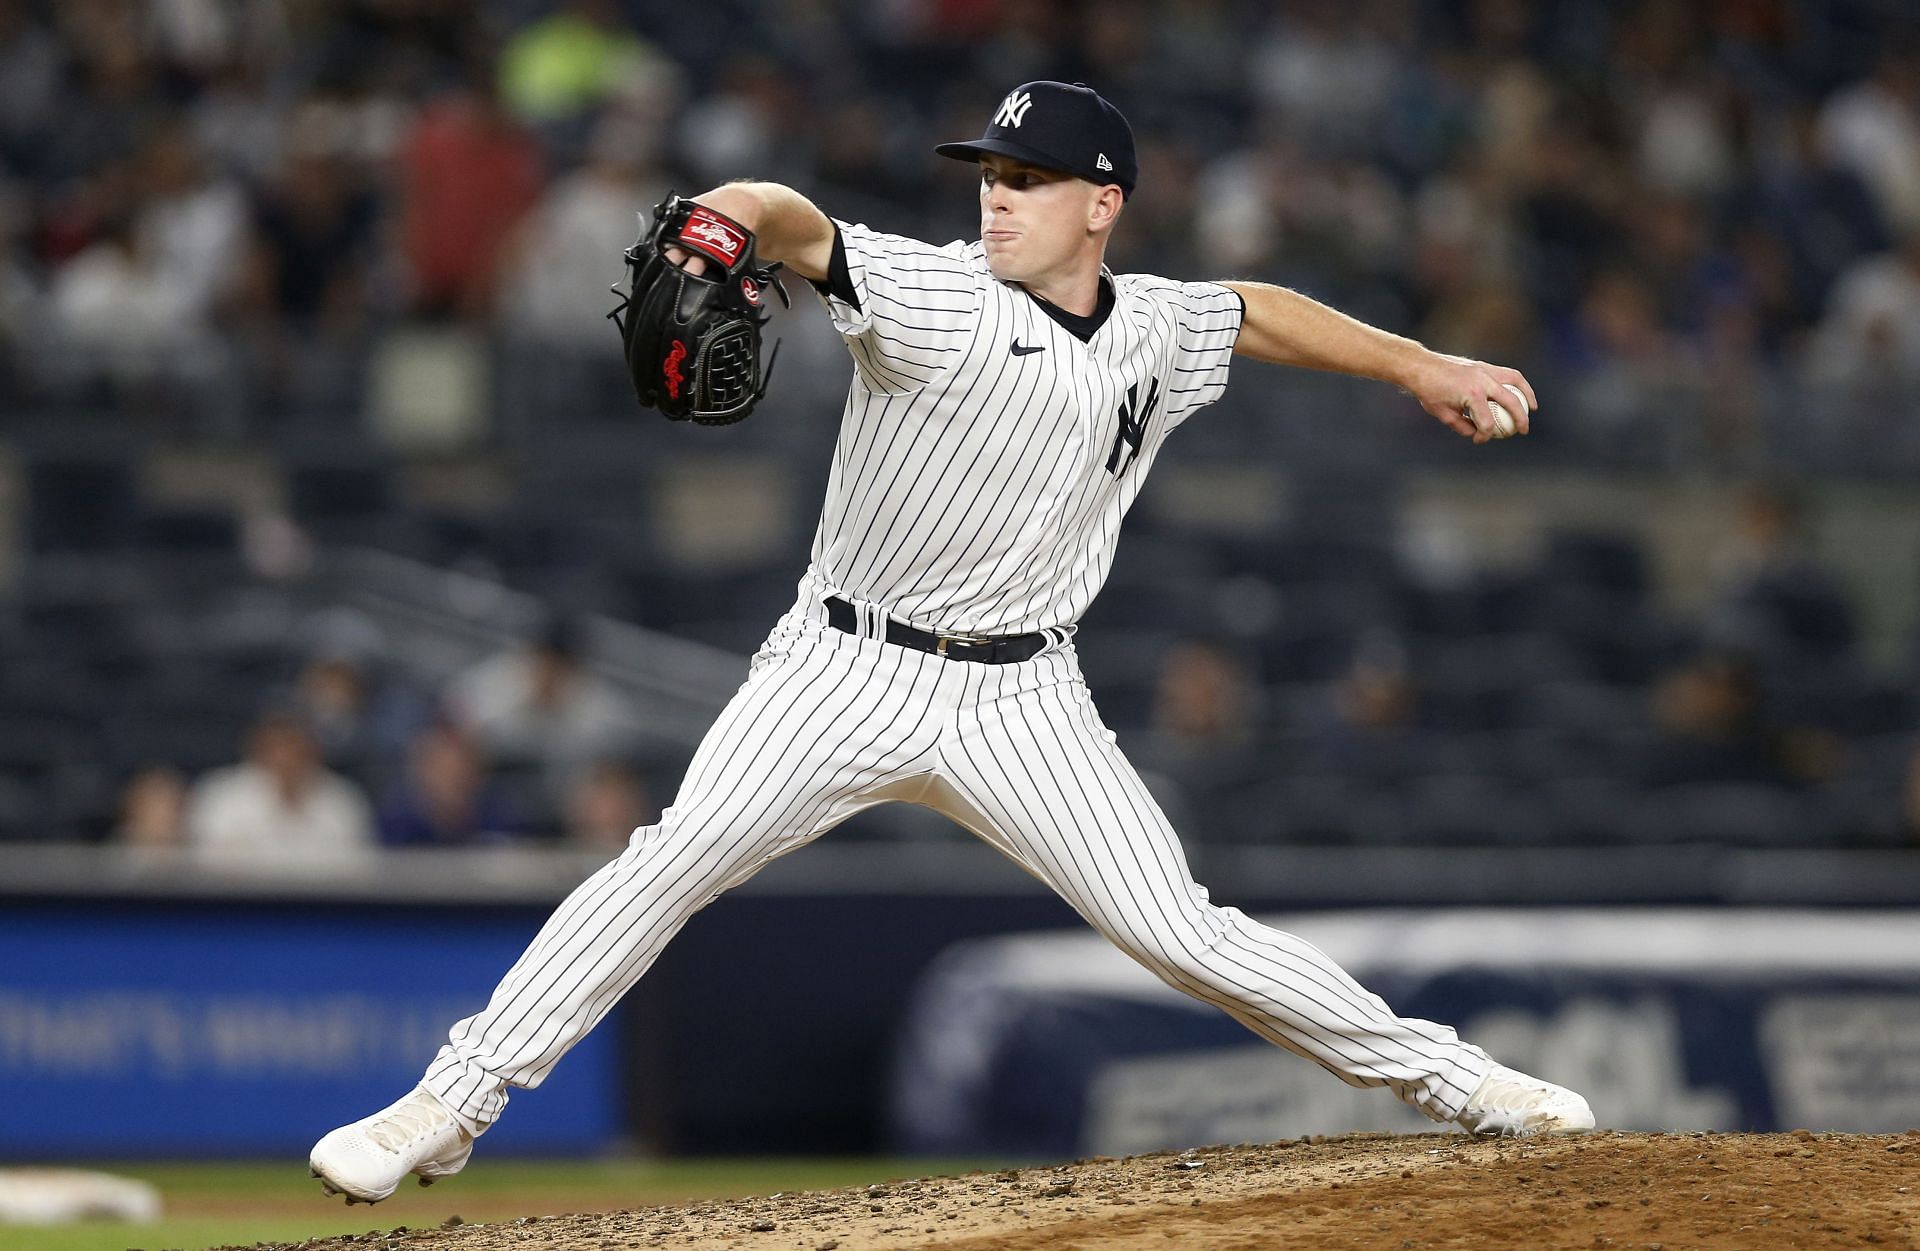 JP Sears of the New York Yankees pitches during the ninth inning against the Toronto Blue Jays